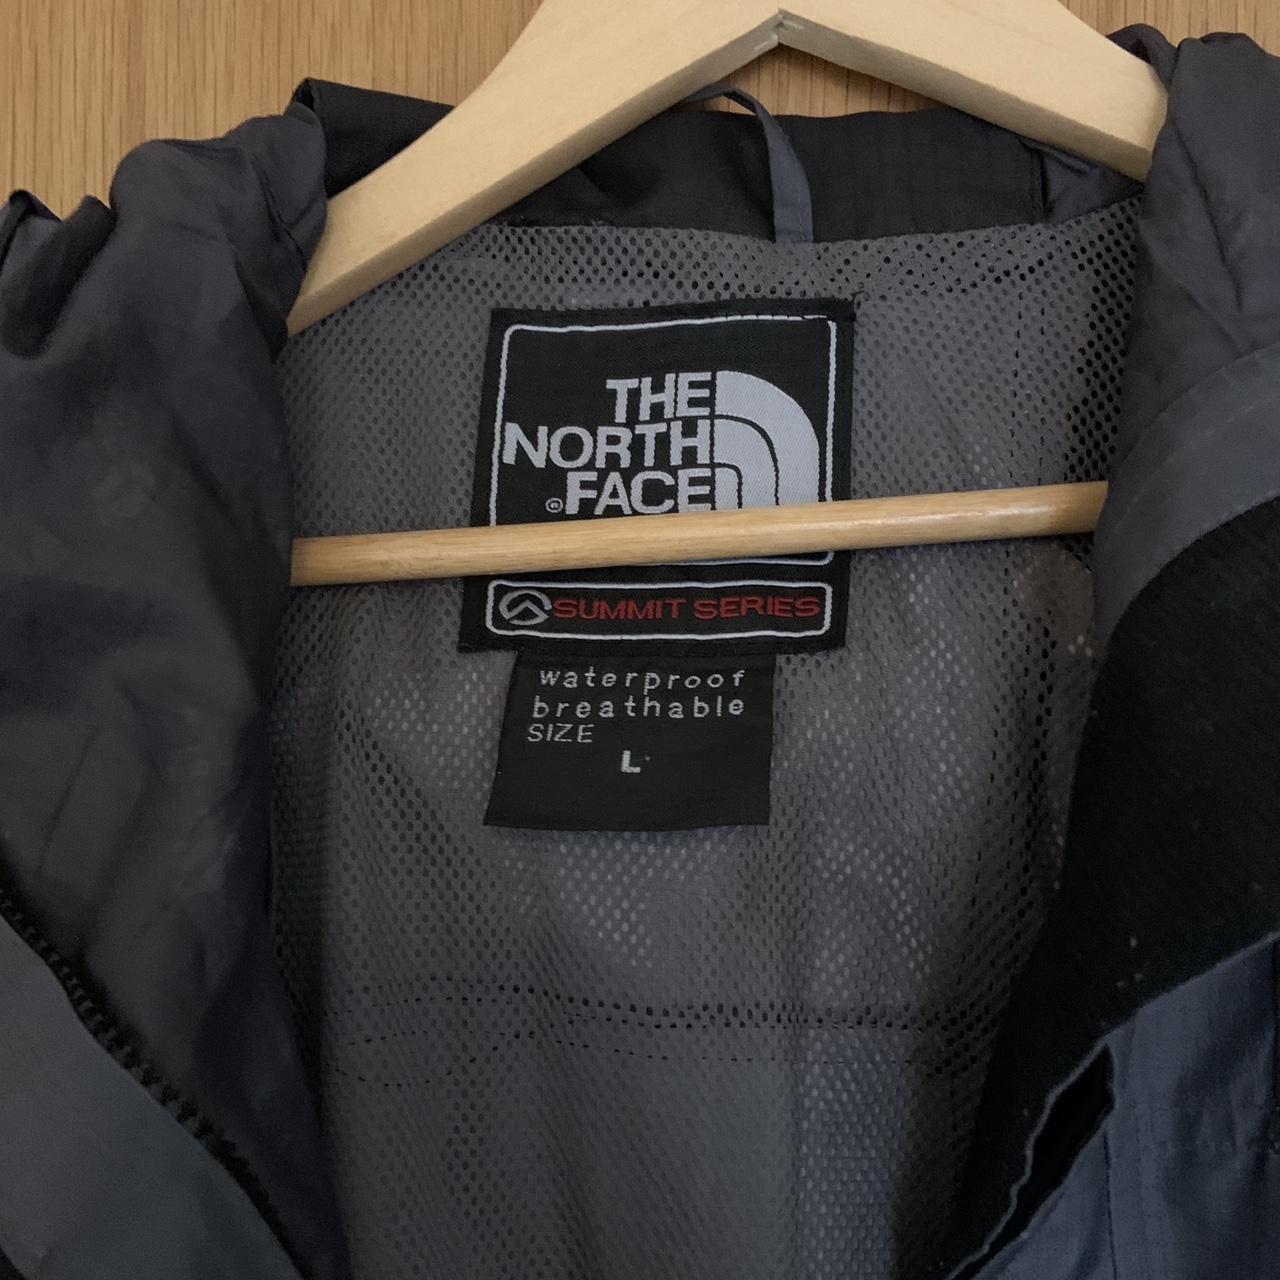 The North Face Gore-Tex Mountain Jacket in black and... - Depop